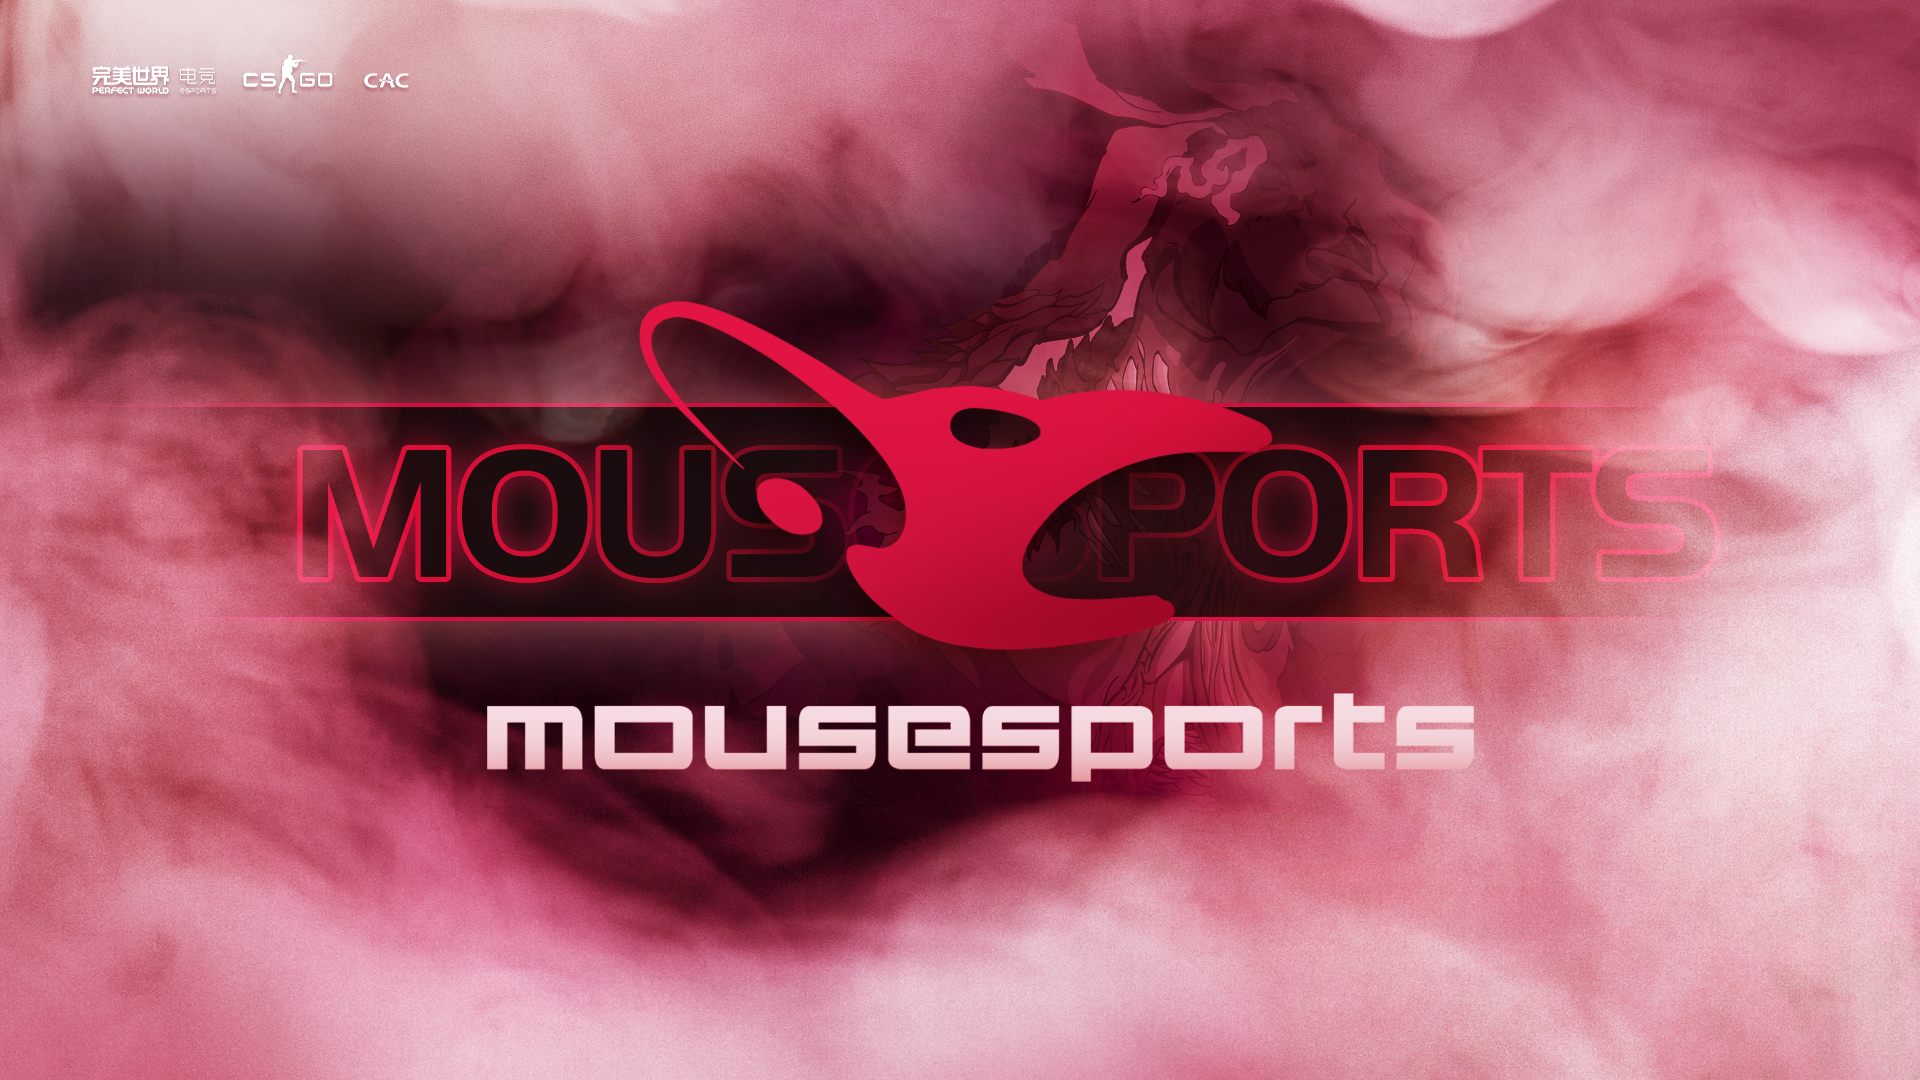 Counter Strike Global Offensive CAC CAC2019 Mousesports 1920x1080